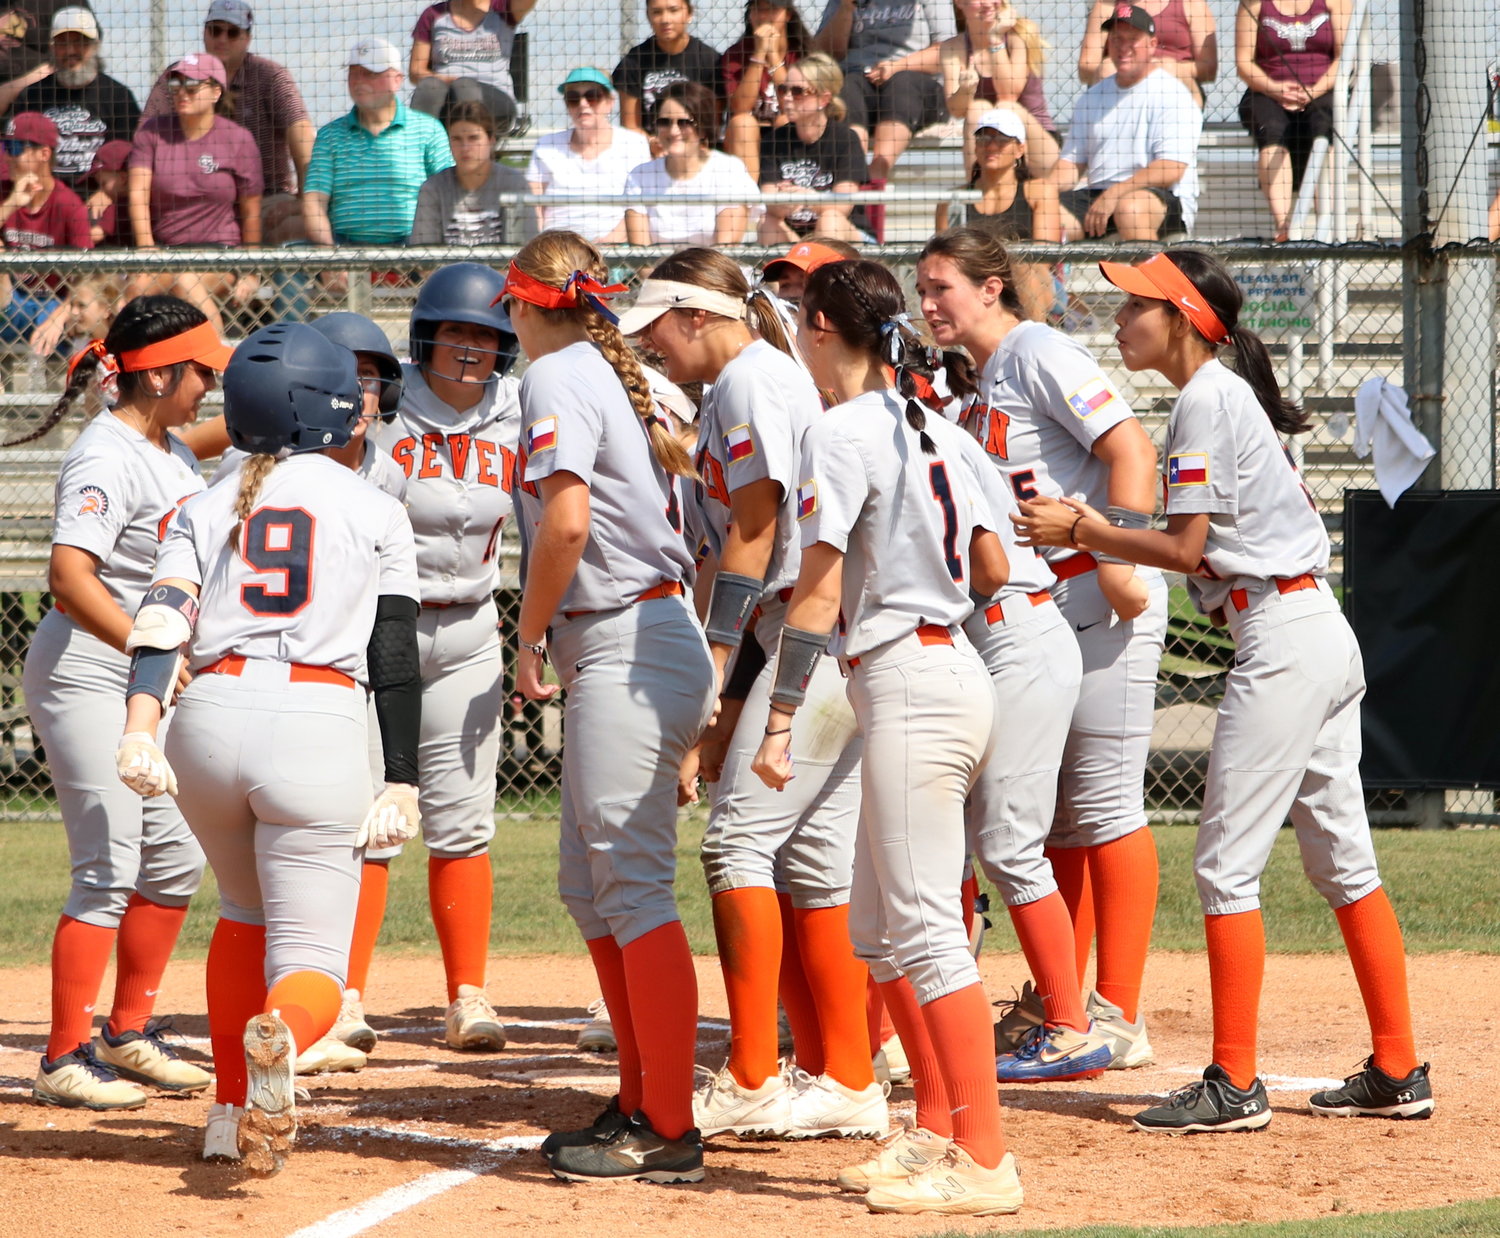 Amy Abke heads towards home plate as her teammates celebrate an Abke home run during Saturday’s Class 6A Regional Quarterfinal game between Seven Lakes and George Ranch at the George Ranch softball field.